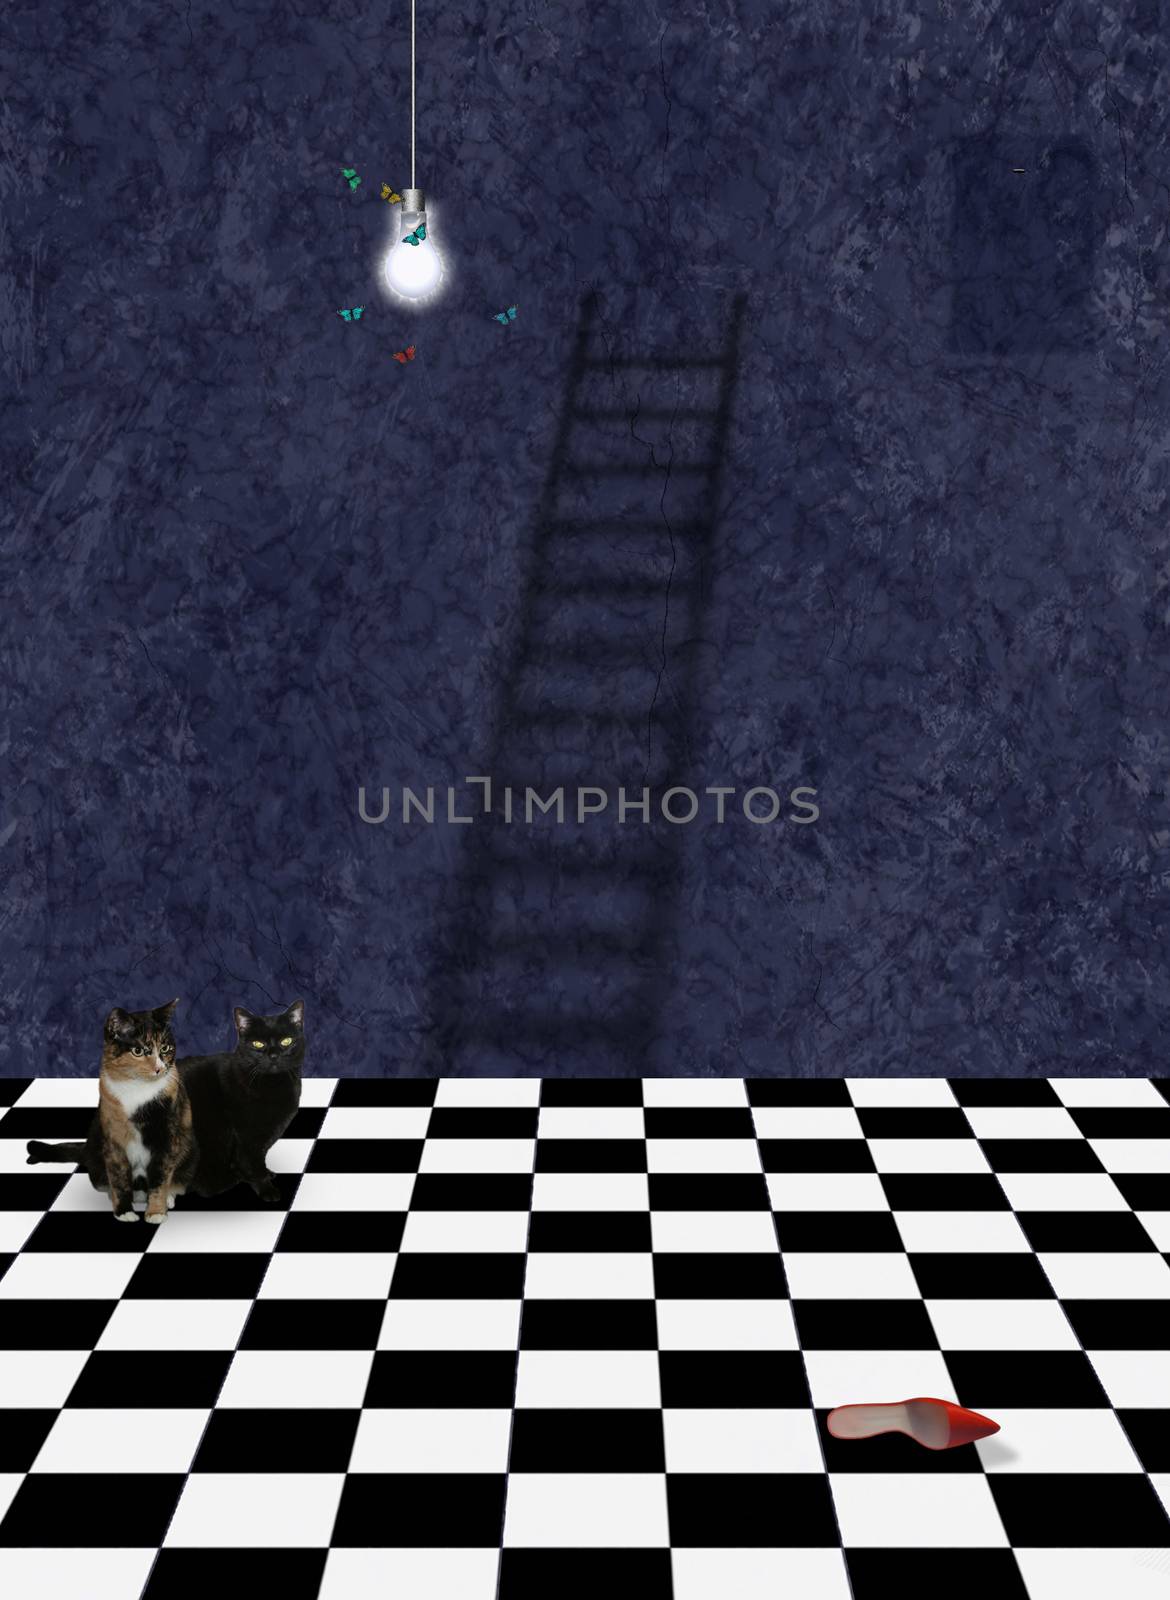 Modern surrealism. Cats in room with ladder and red shoe